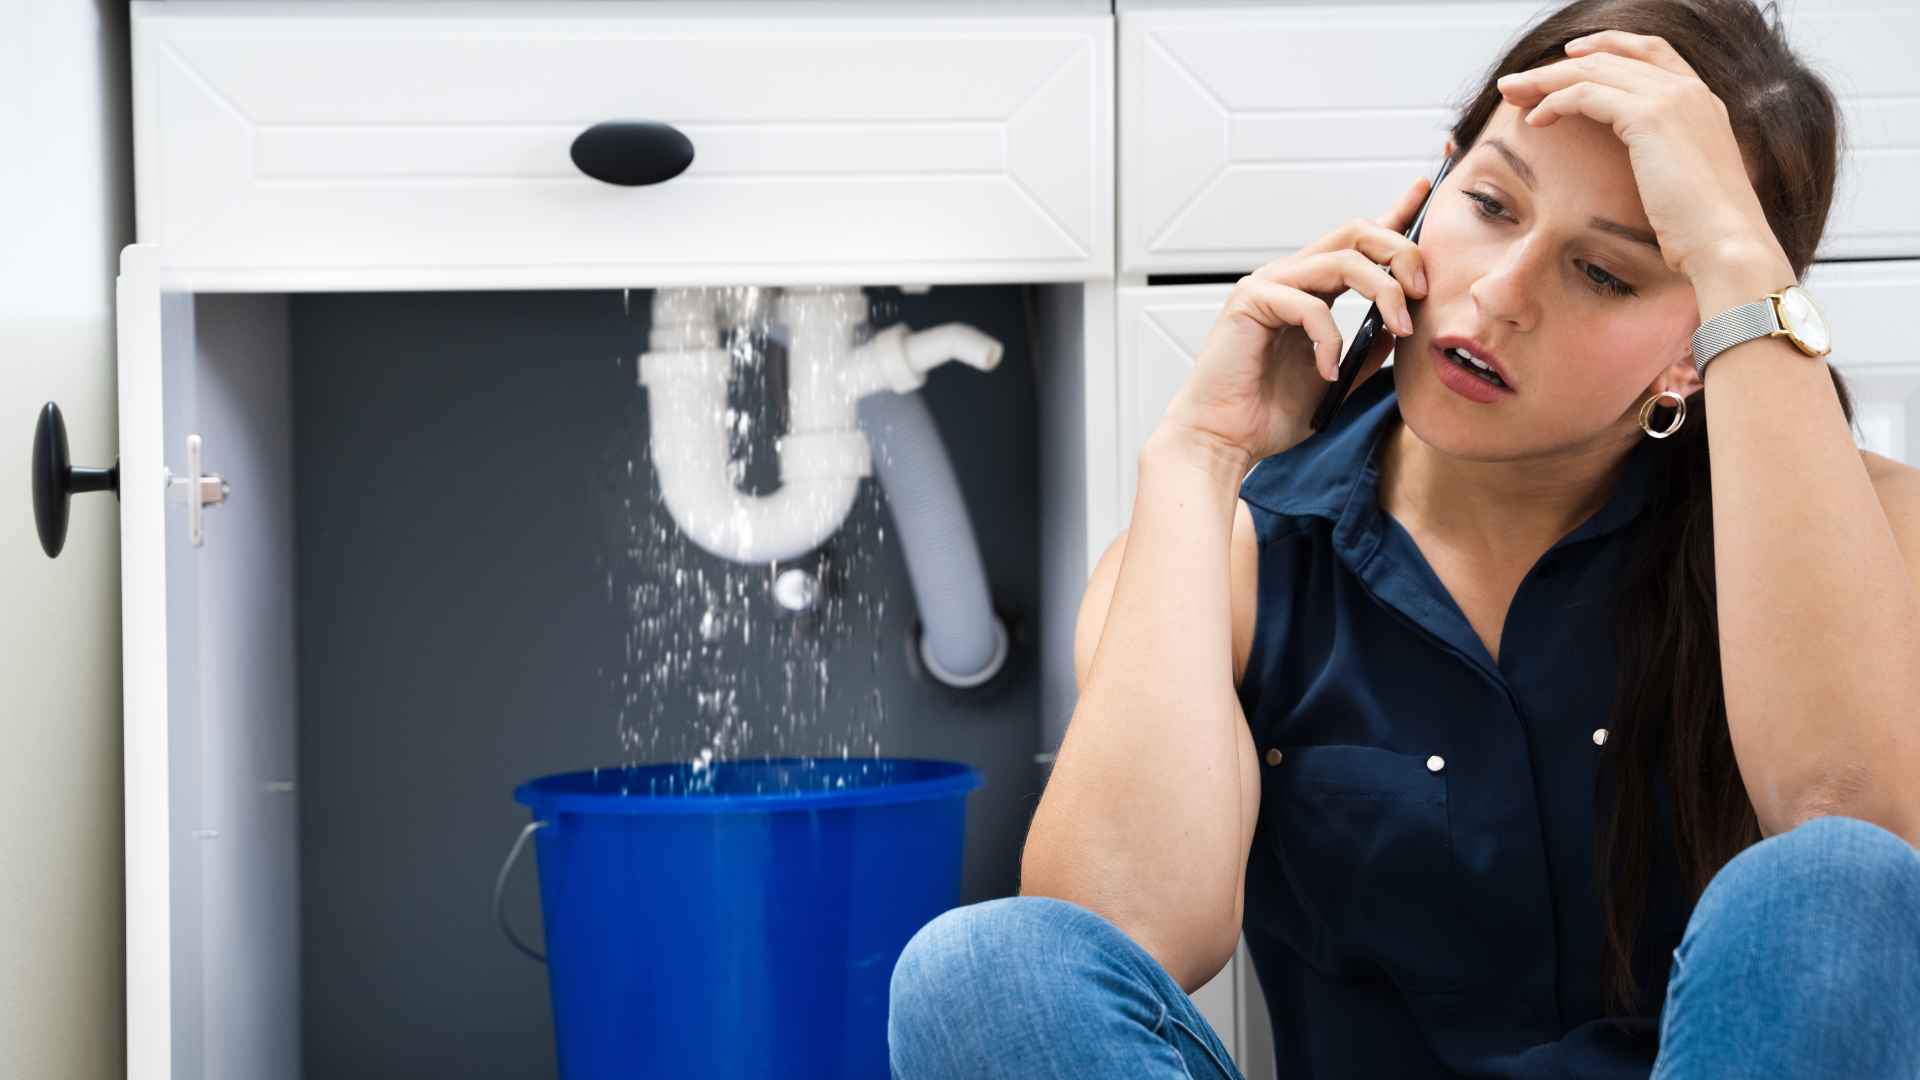 A woman on the phone, looking stressed, as hidden leaks drip from a sink pipe into a bucket below.